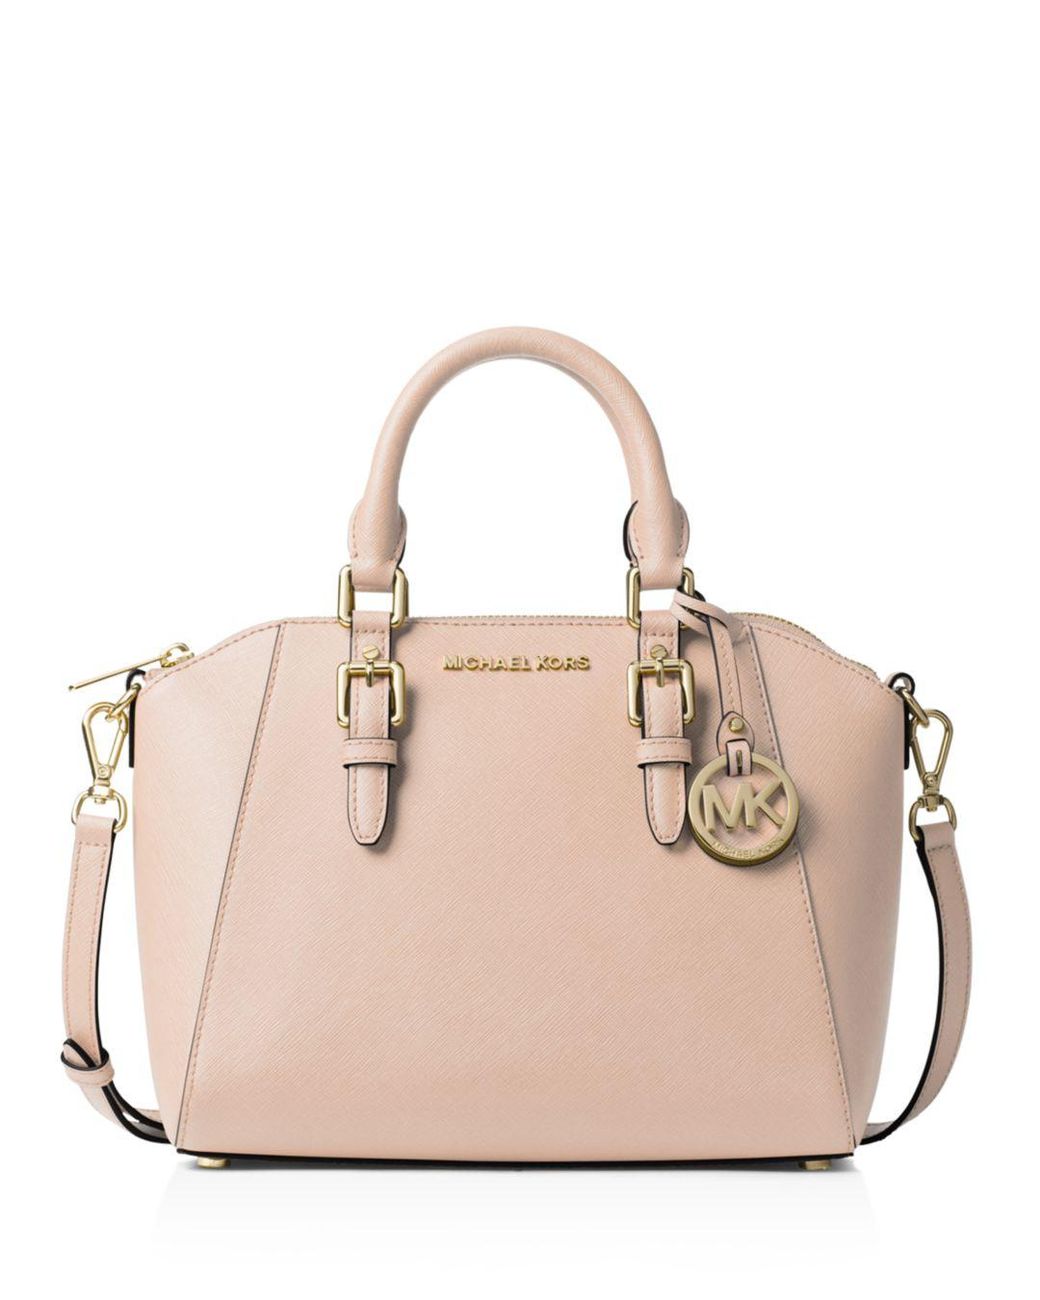 Behov for Rute Uafhængighed MICHAEL Michael Kors Ciara Medium Leather Messenger Bag in Pink | Lyst